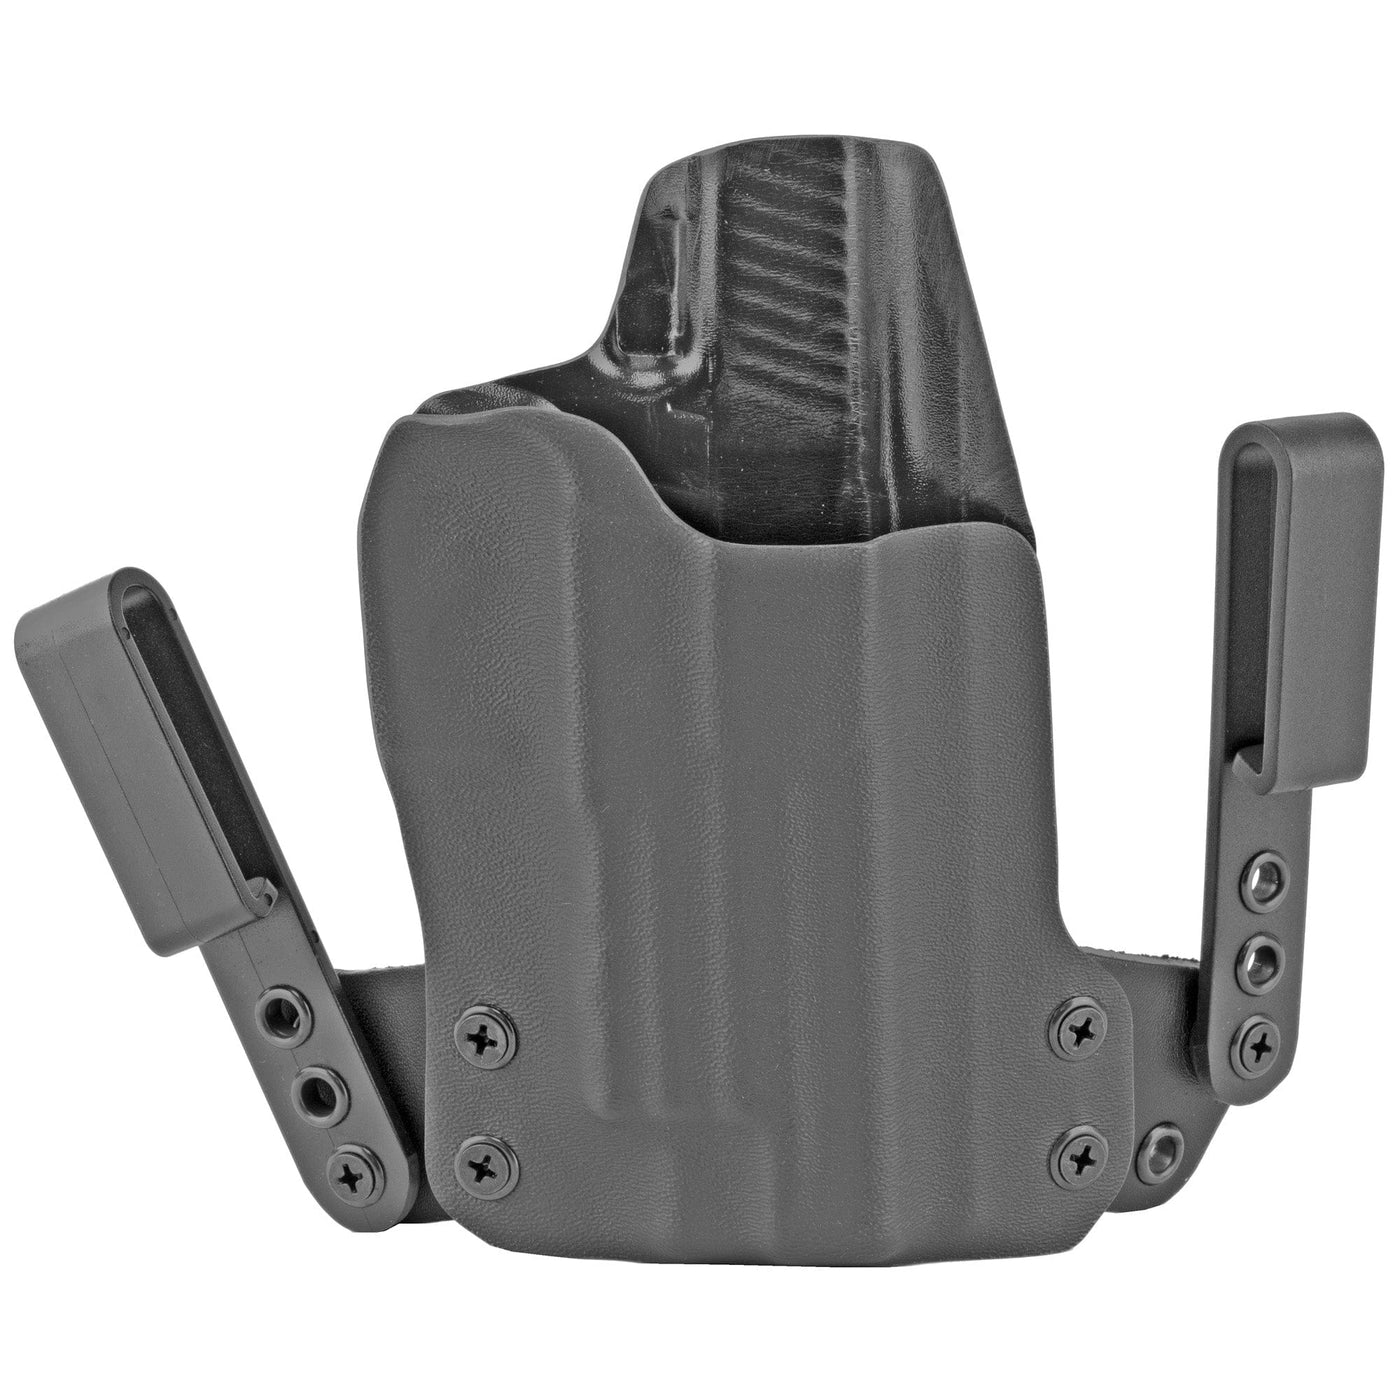 BlackPoint Tactical Blk Pnt Mini Wing Sig P226 Rh Blk Holsters